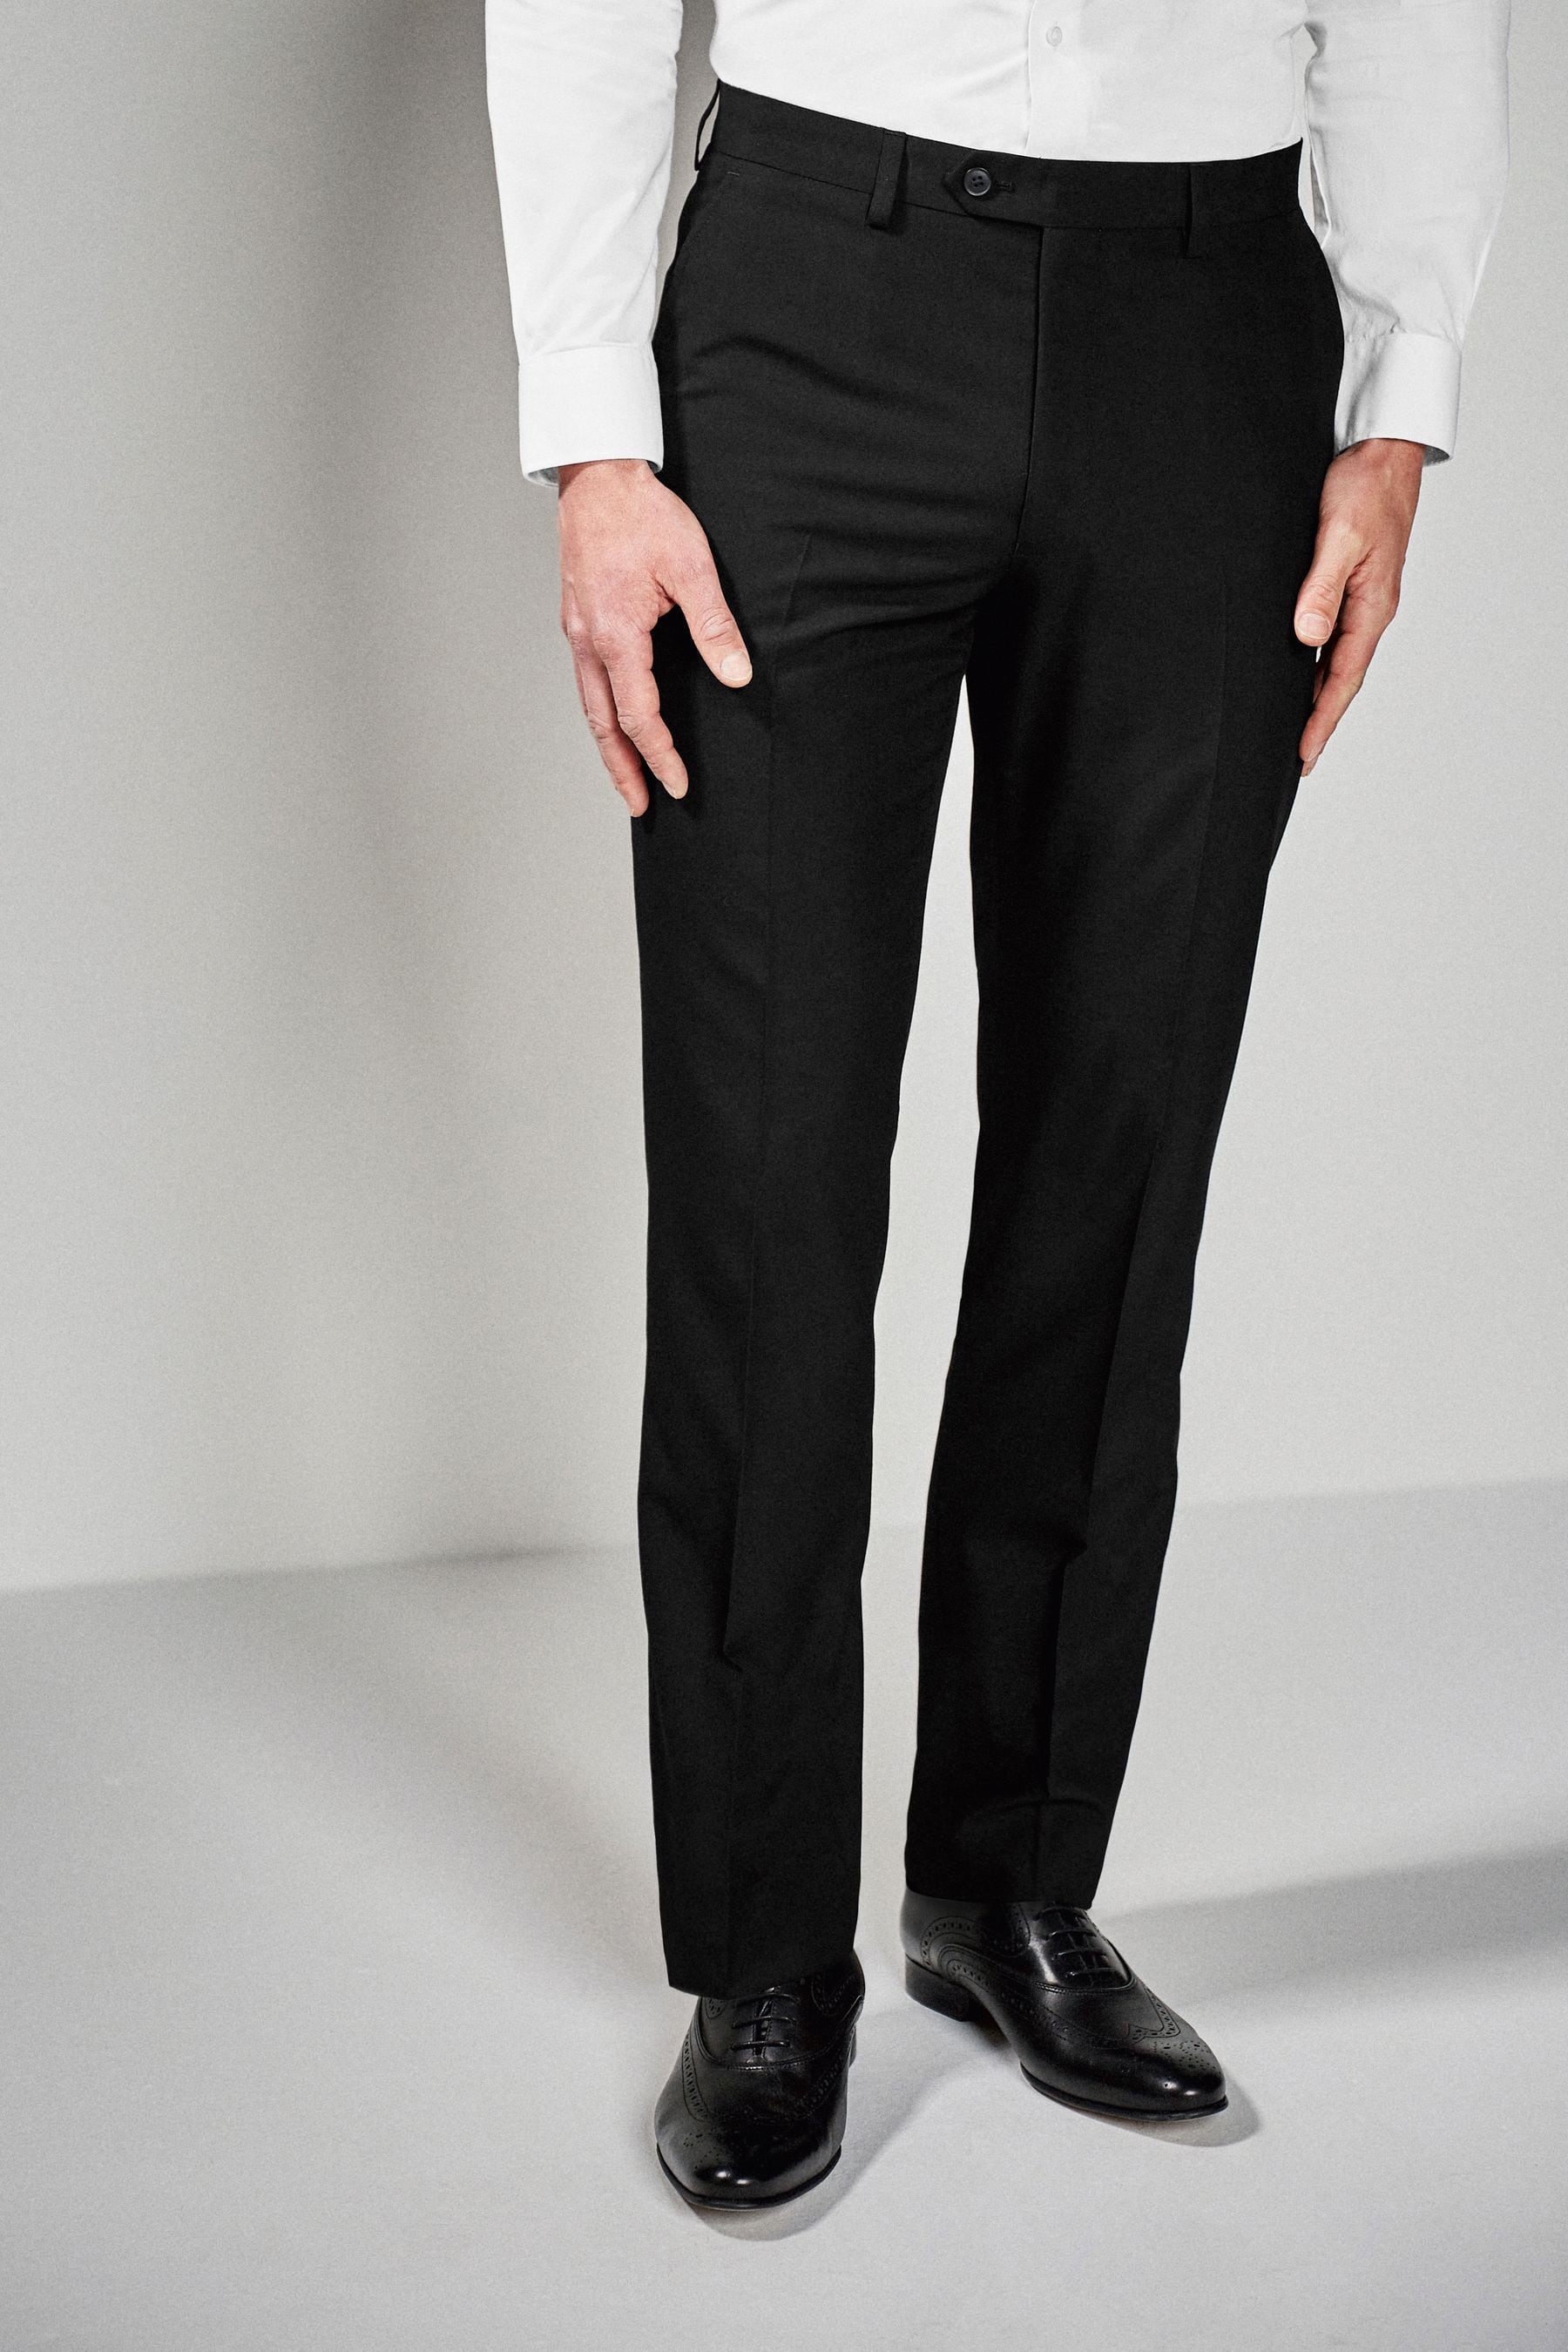 Buy Black Regular Fit Suit Trousers from Next Australia